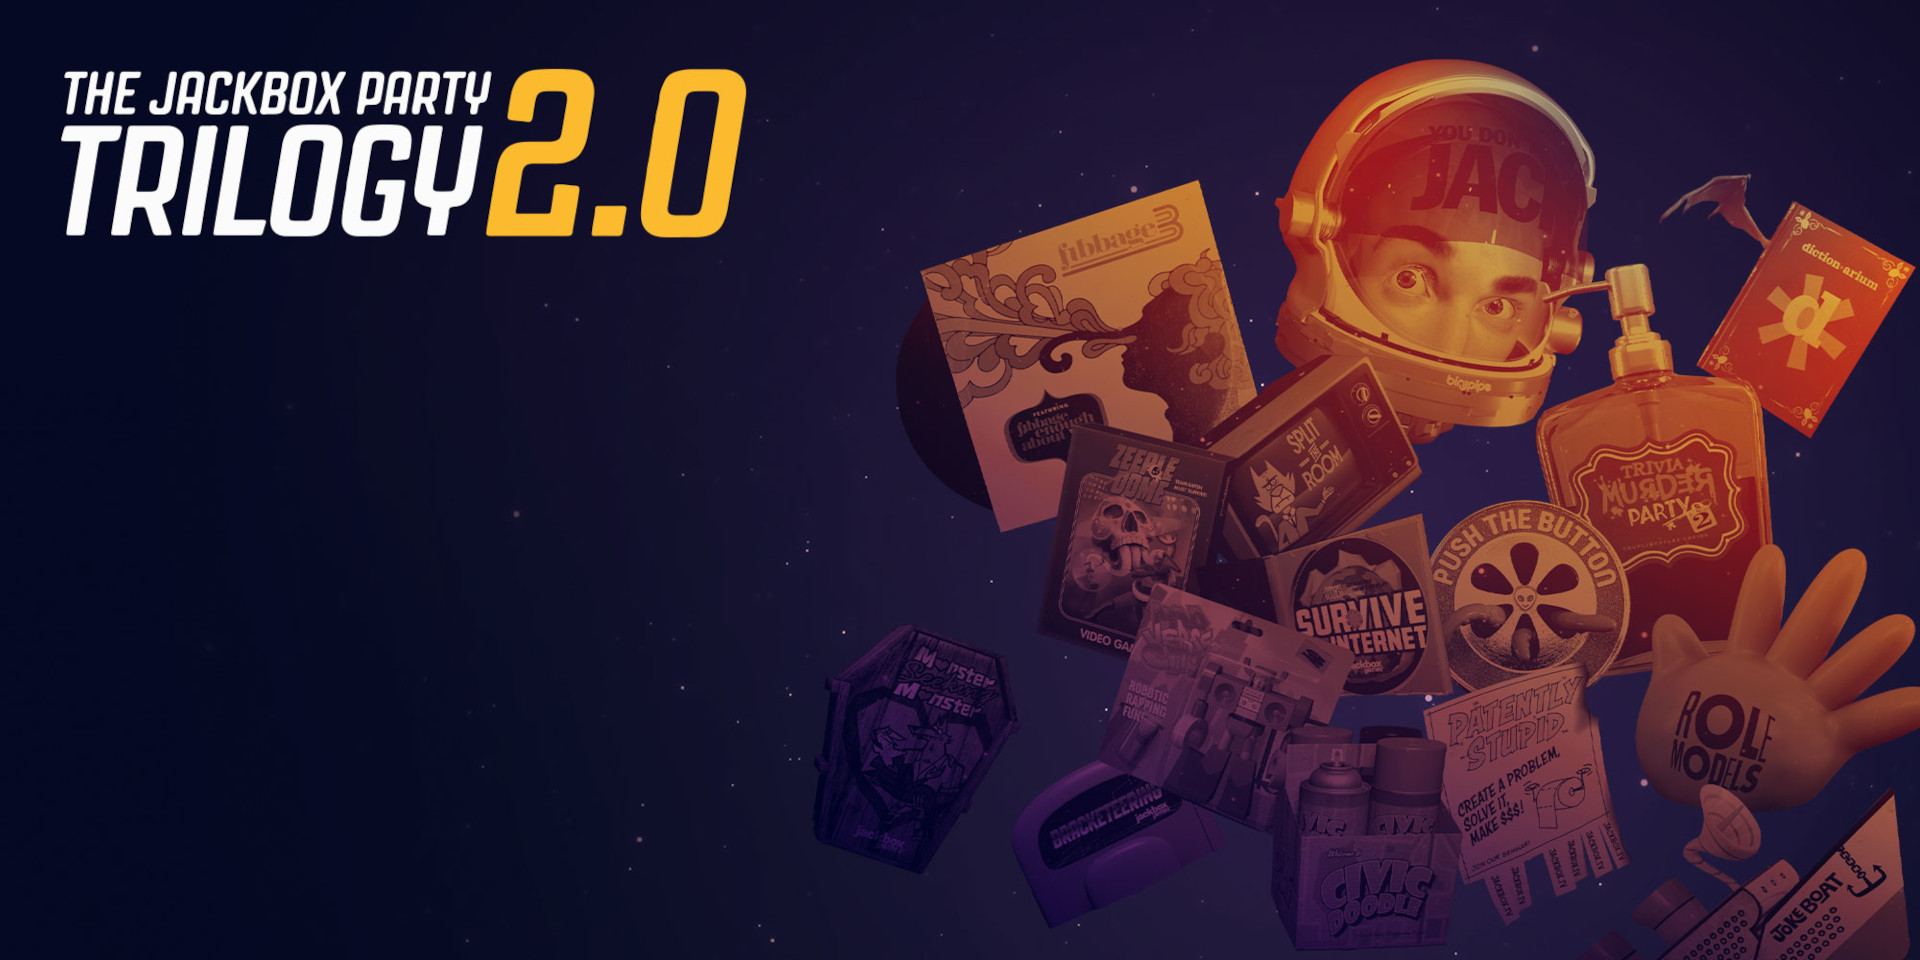 The Jackbox Party Pack Trilogy 2.0 Steam CD Key, 47.83$